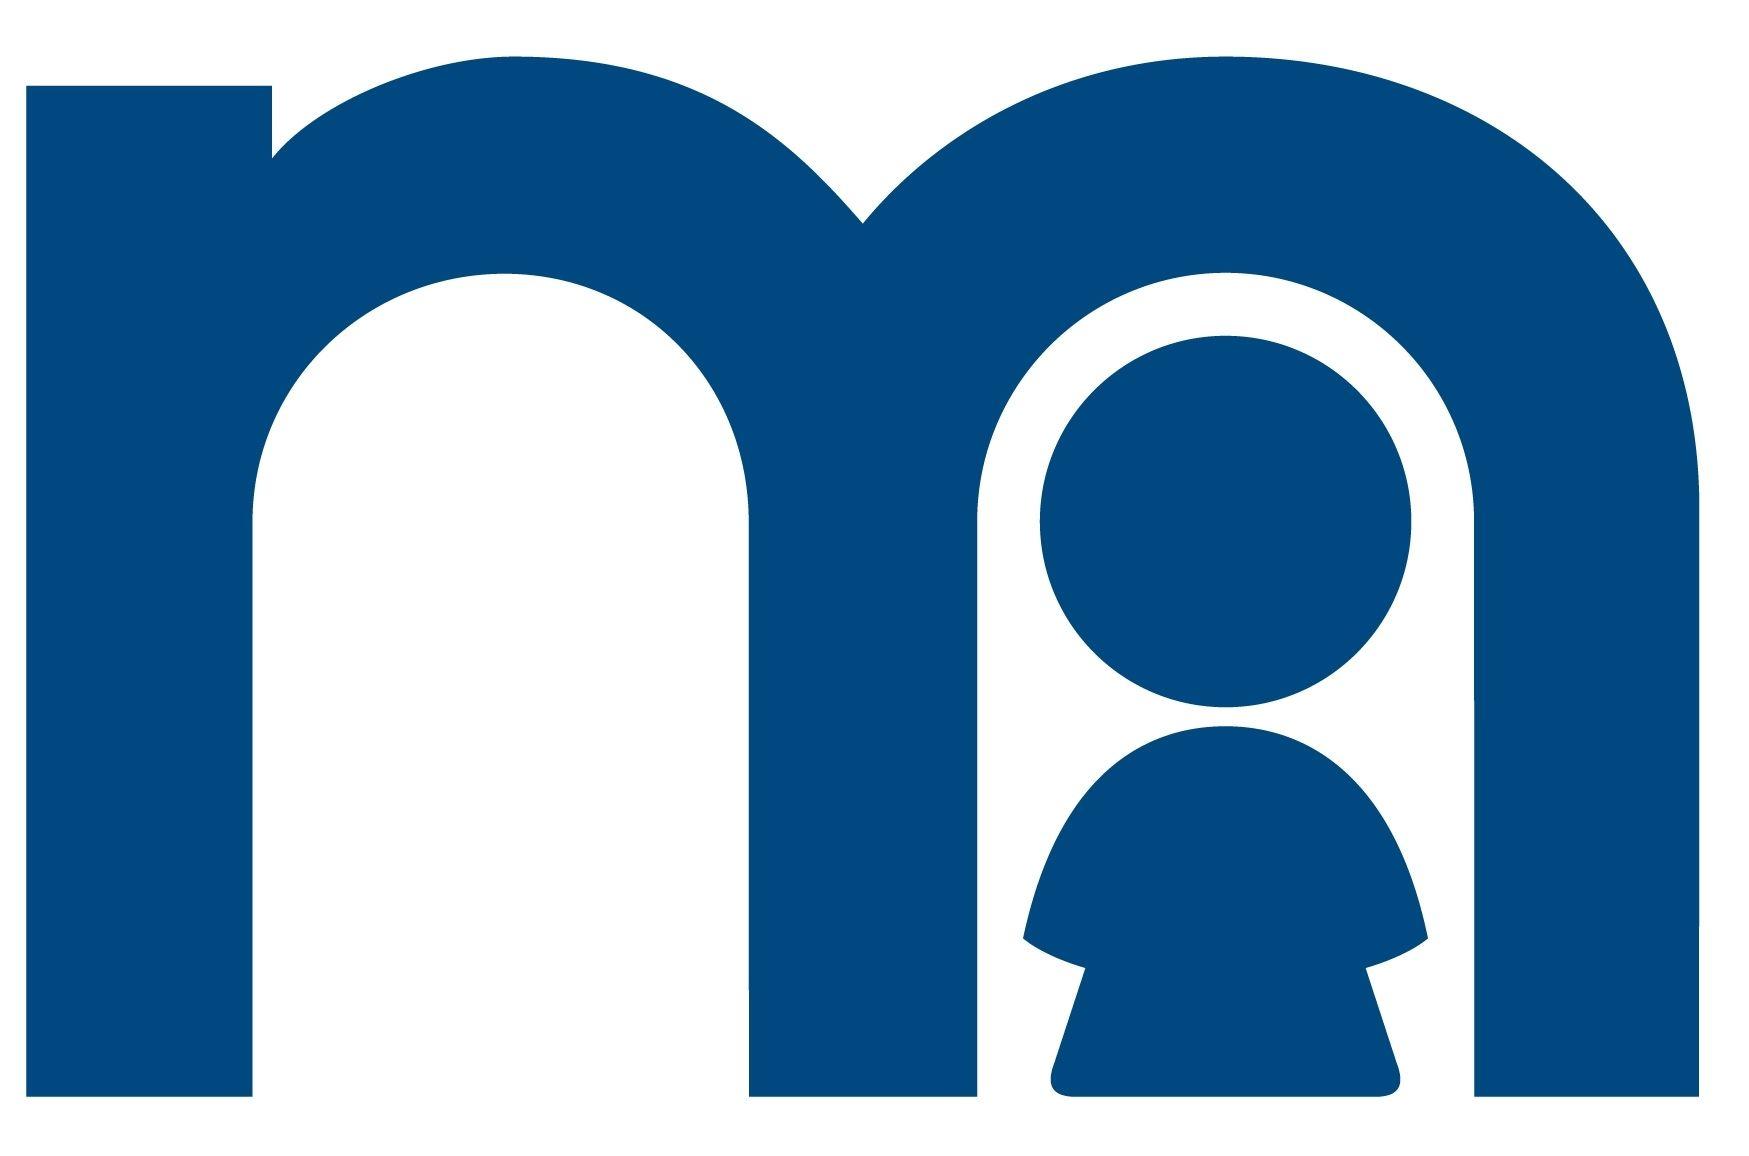 British Retailer Logo - Tommy's and Mothercare